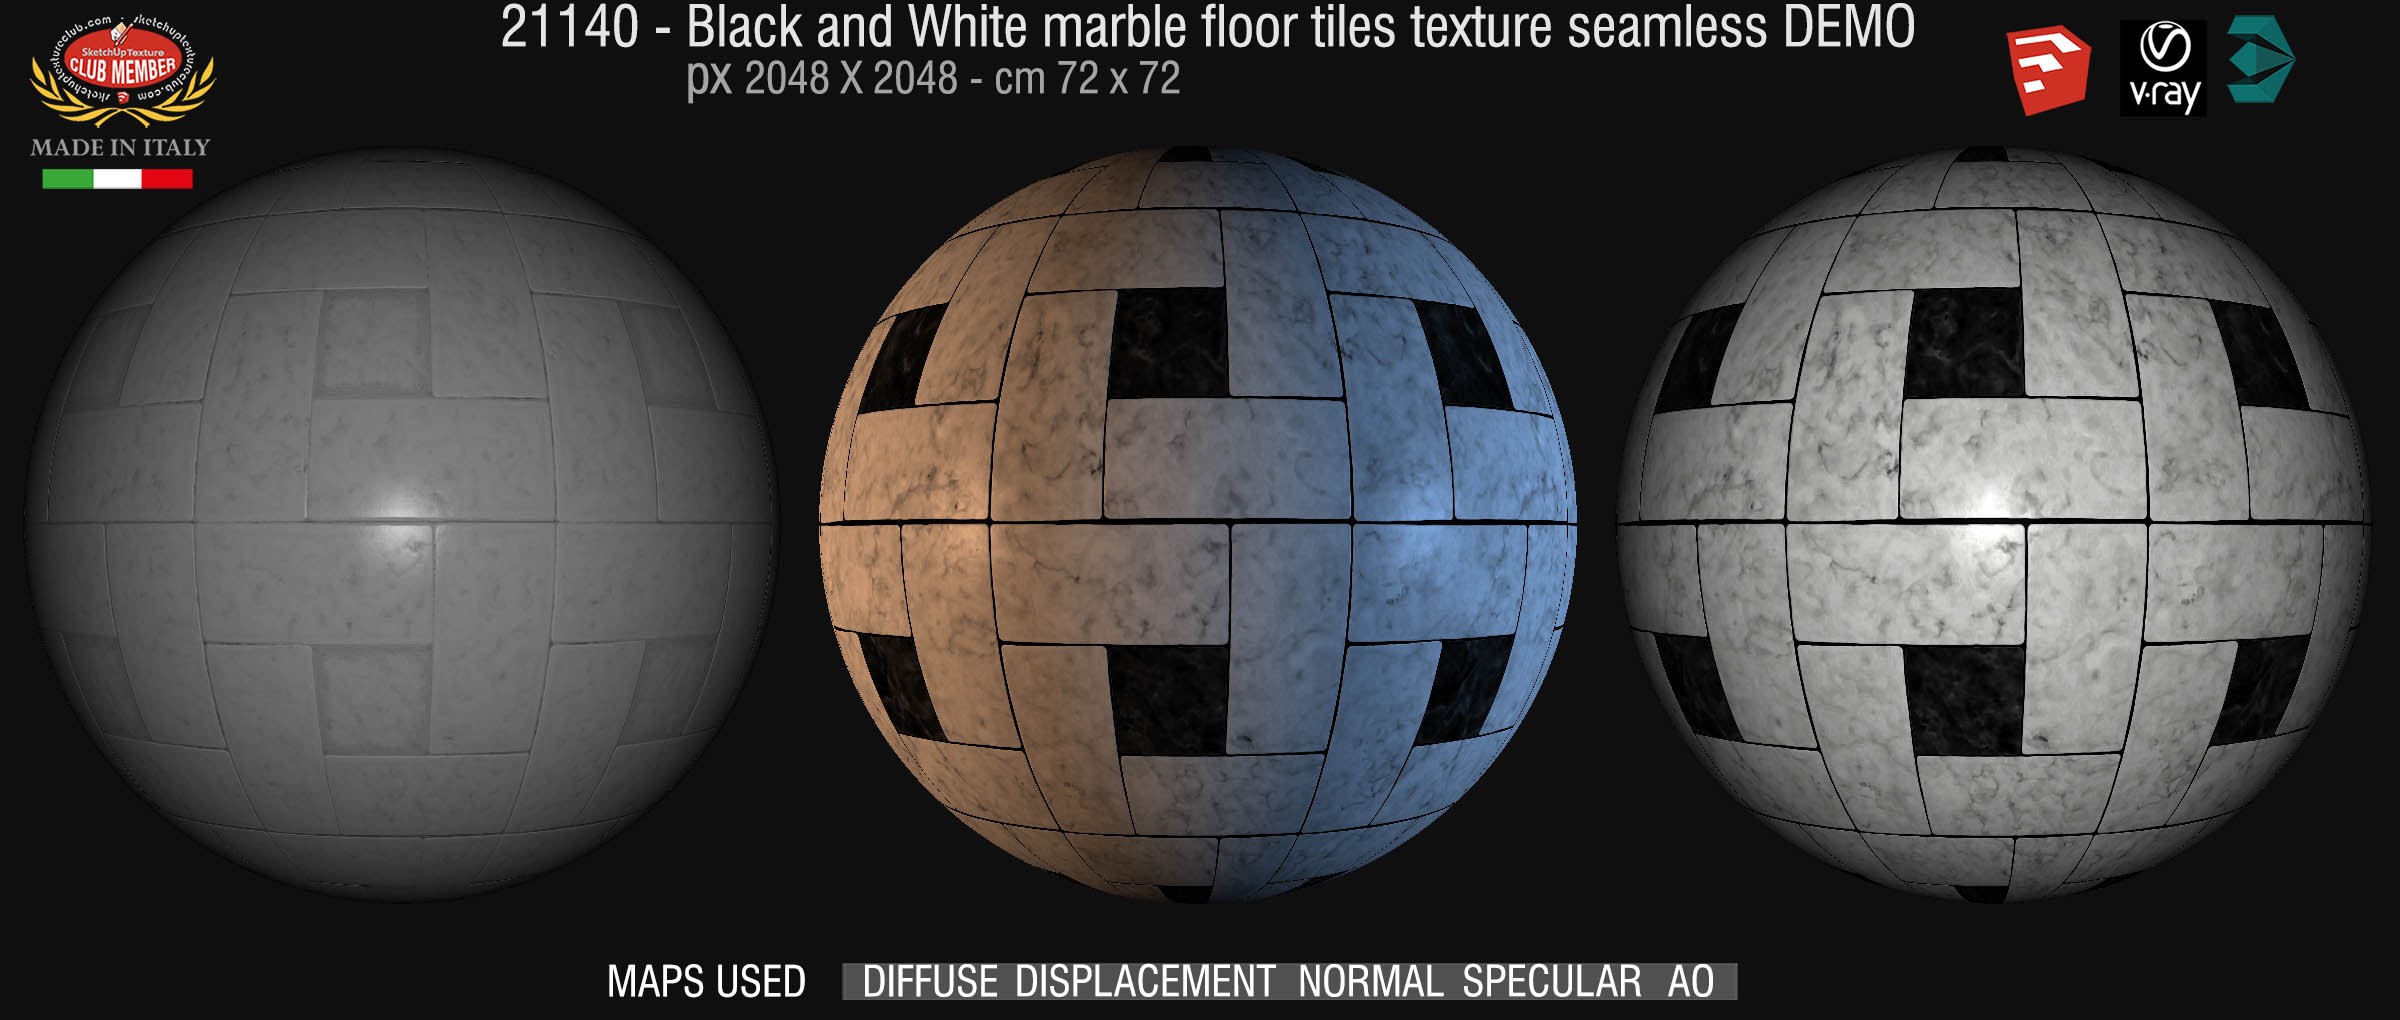 21140 Black and white marble tile texture seamless + maps DEMO